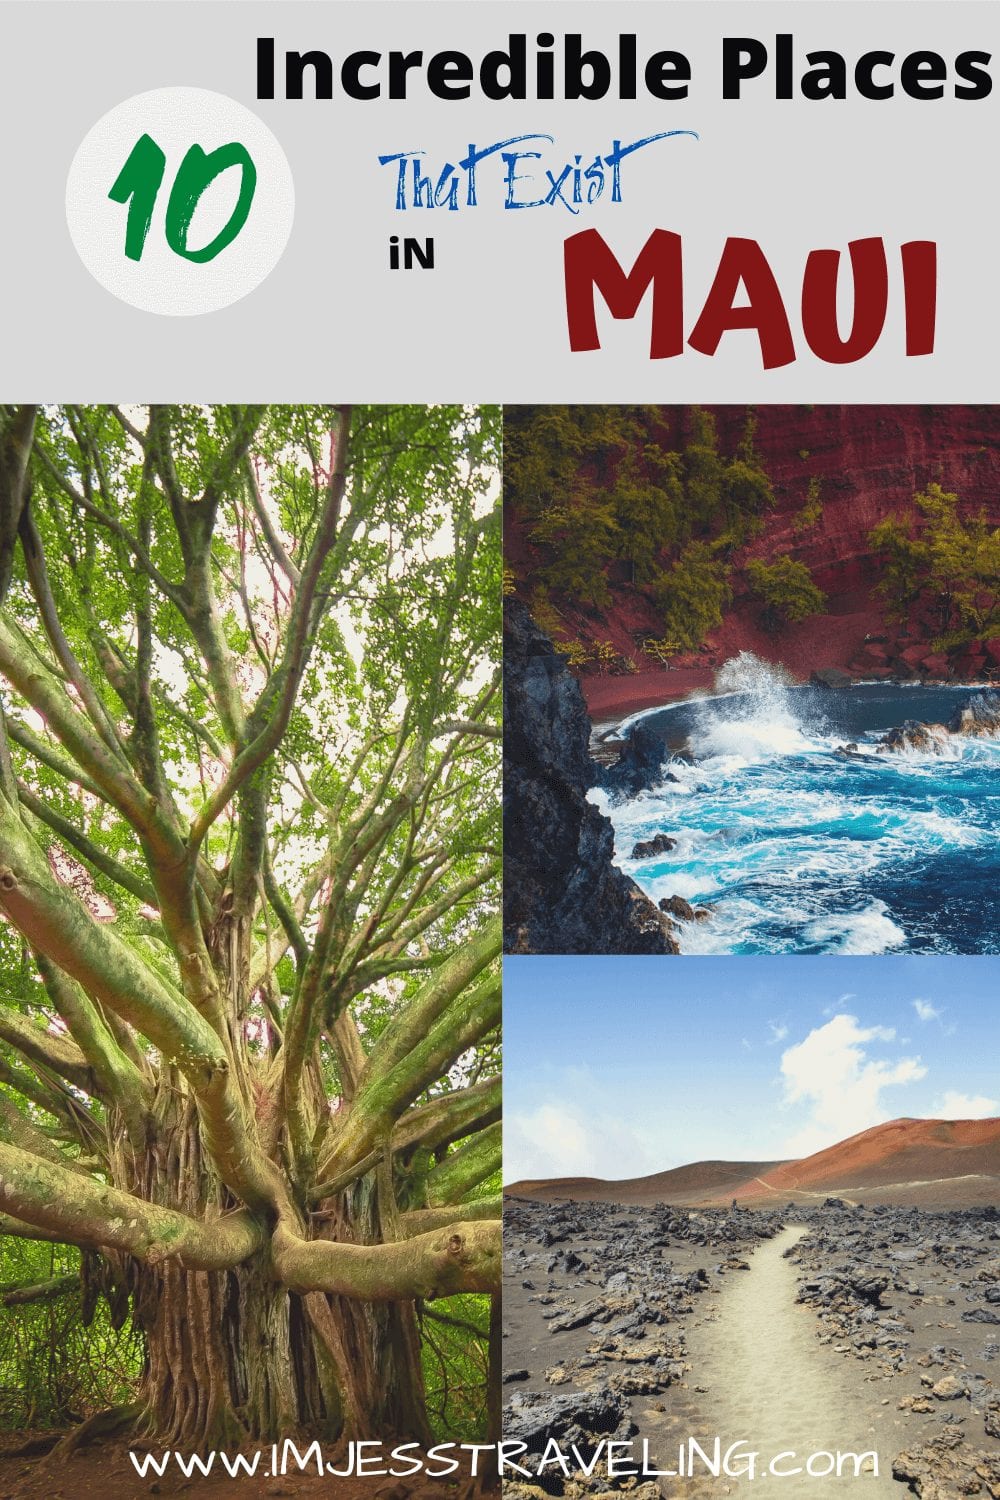 10 Incredible Places in Maui you Must See